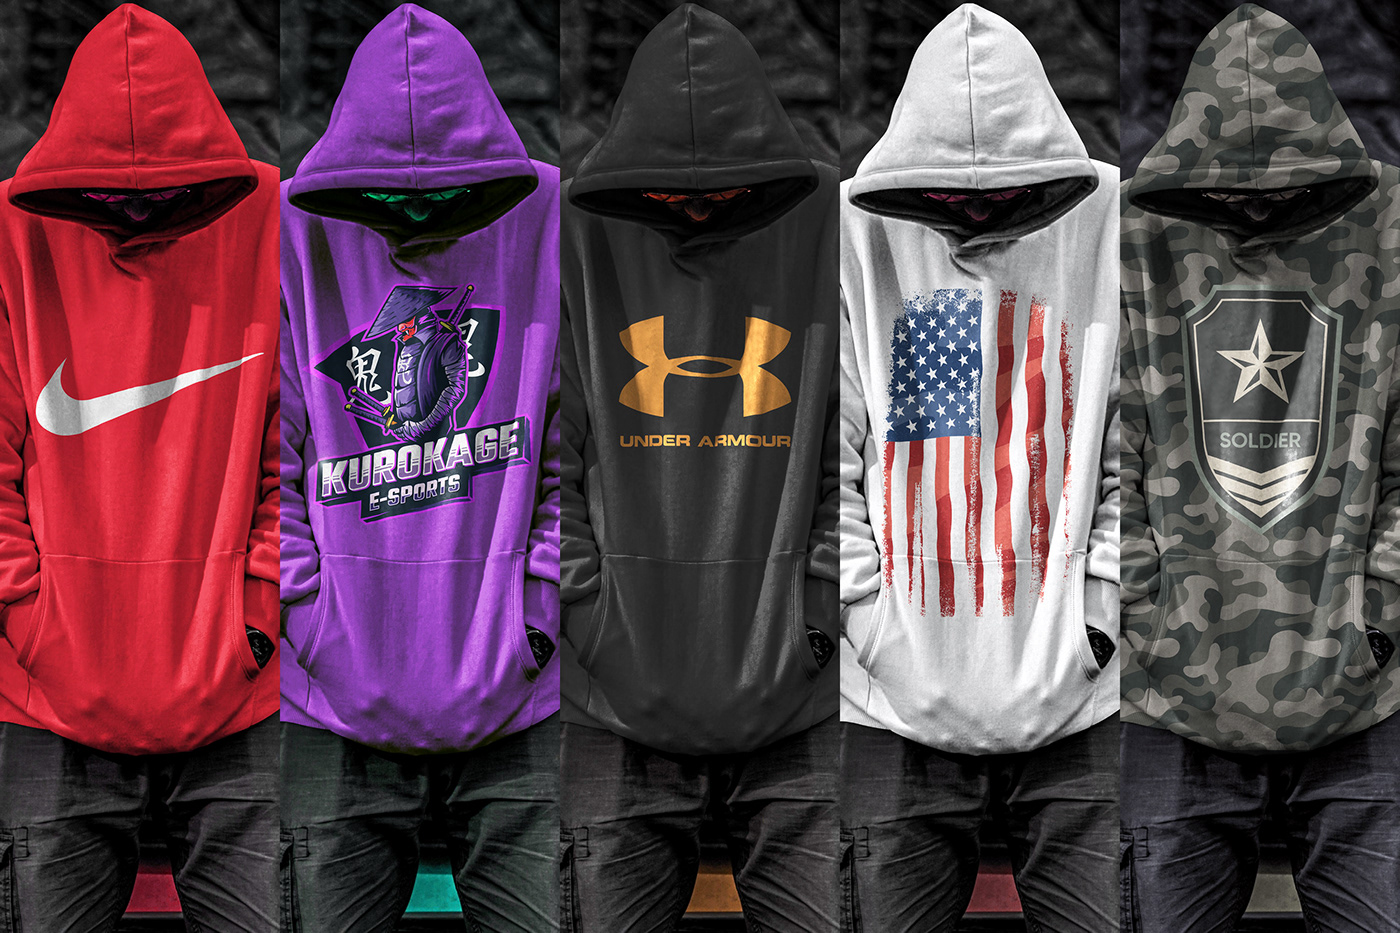 Download FREE PSD URBAN HOODIE MOCKUP OF A YOUNG MAN on Behance